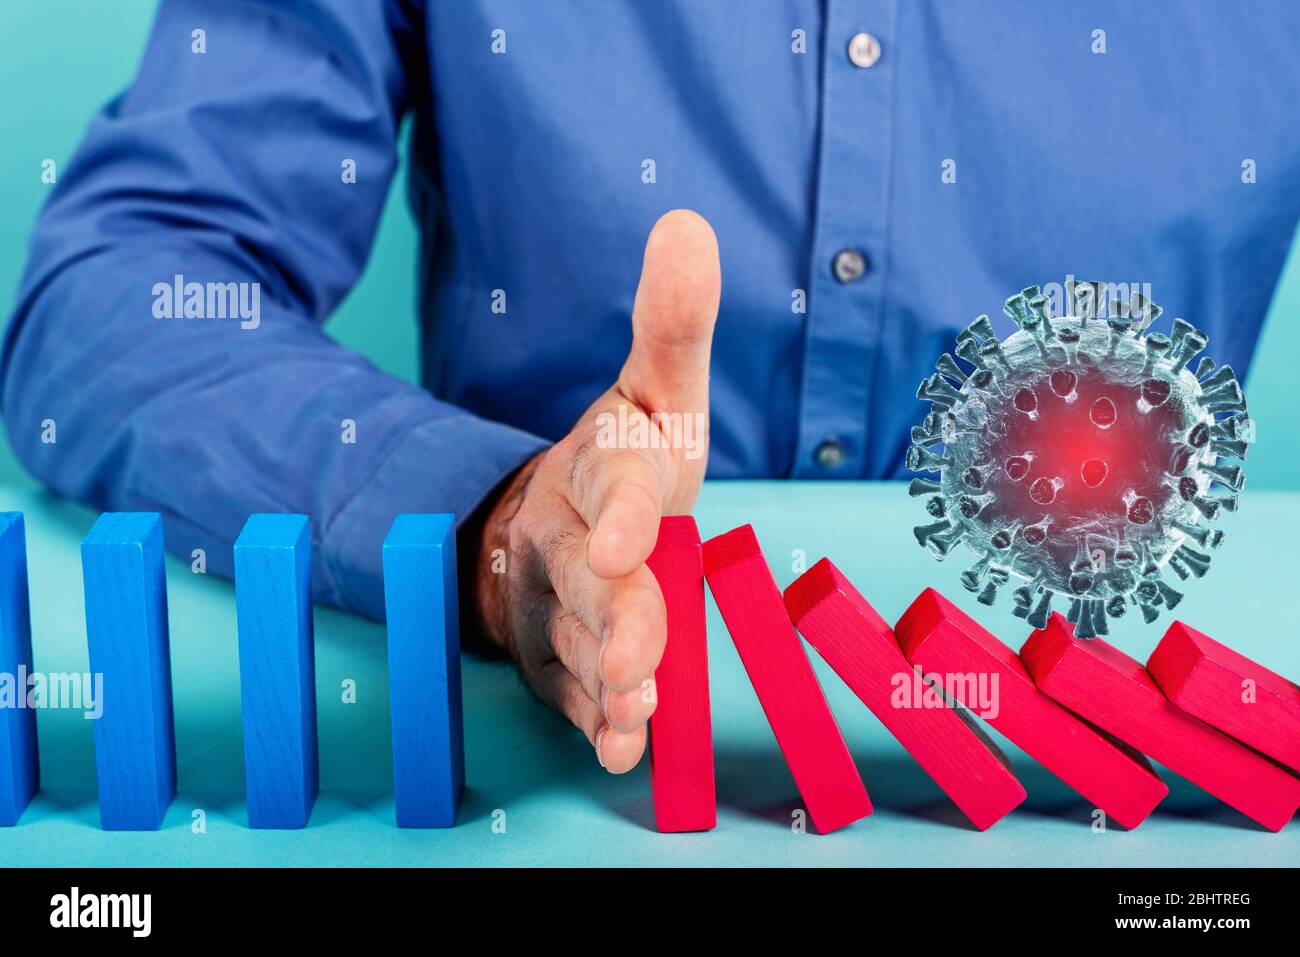 Concept of covid19 coronavirus pandemic with falling chain like a domino game. Contagion and infection progression stopped by a hand of a doctor. Cyan Stock Photo